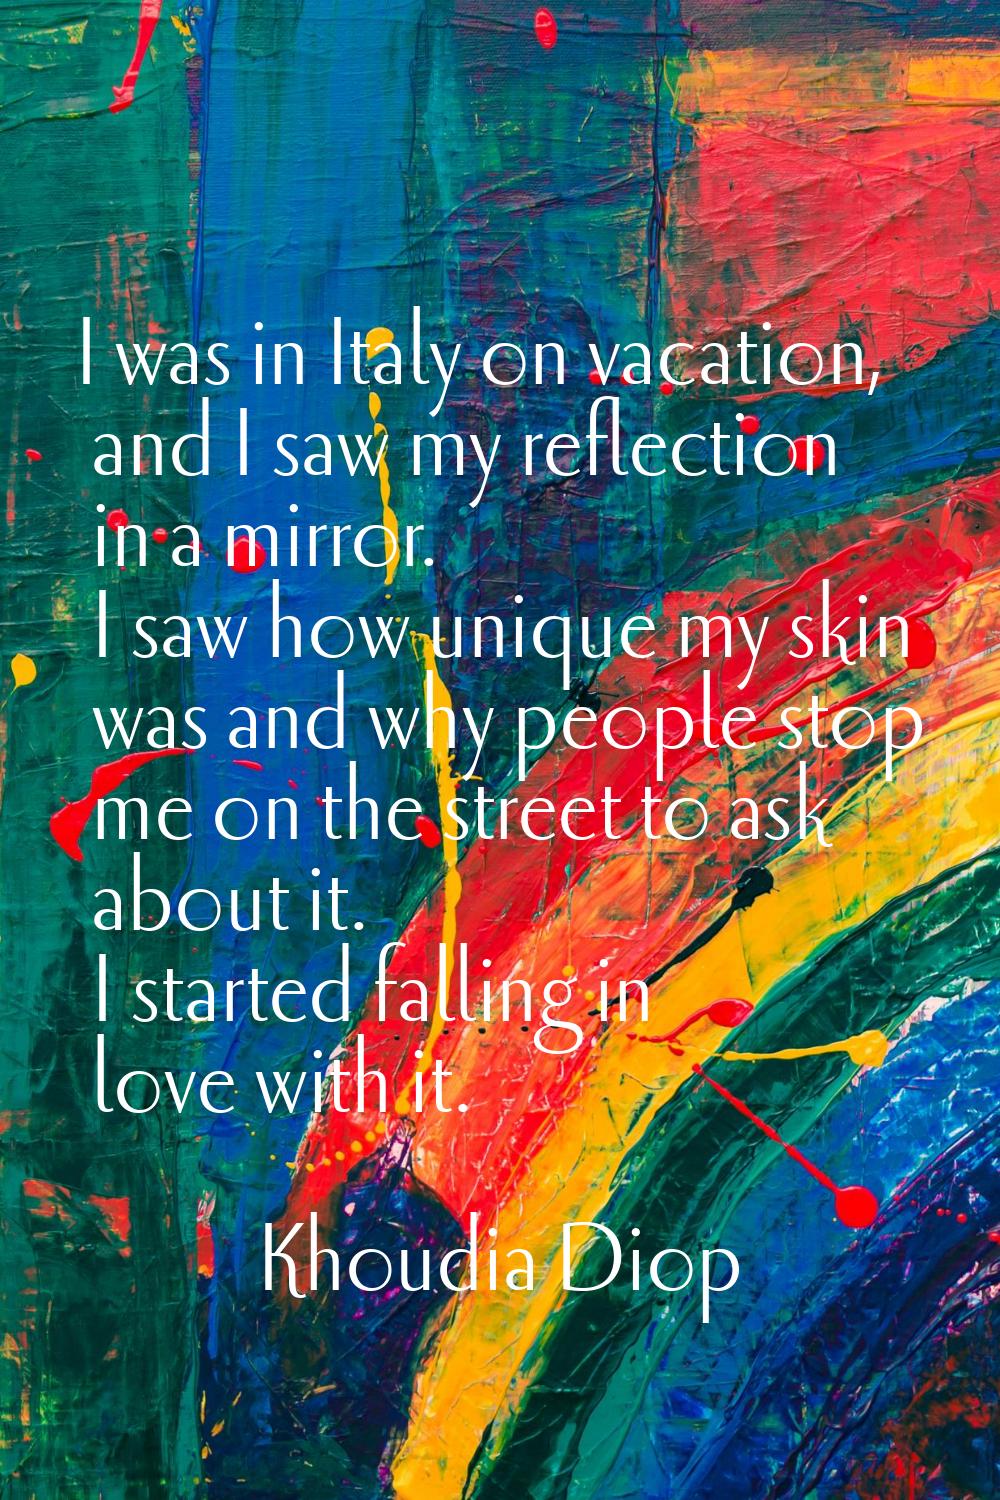 I was in Italy on vacation, and I saw my reflection in a mirror. I saw how unique my skin was and w